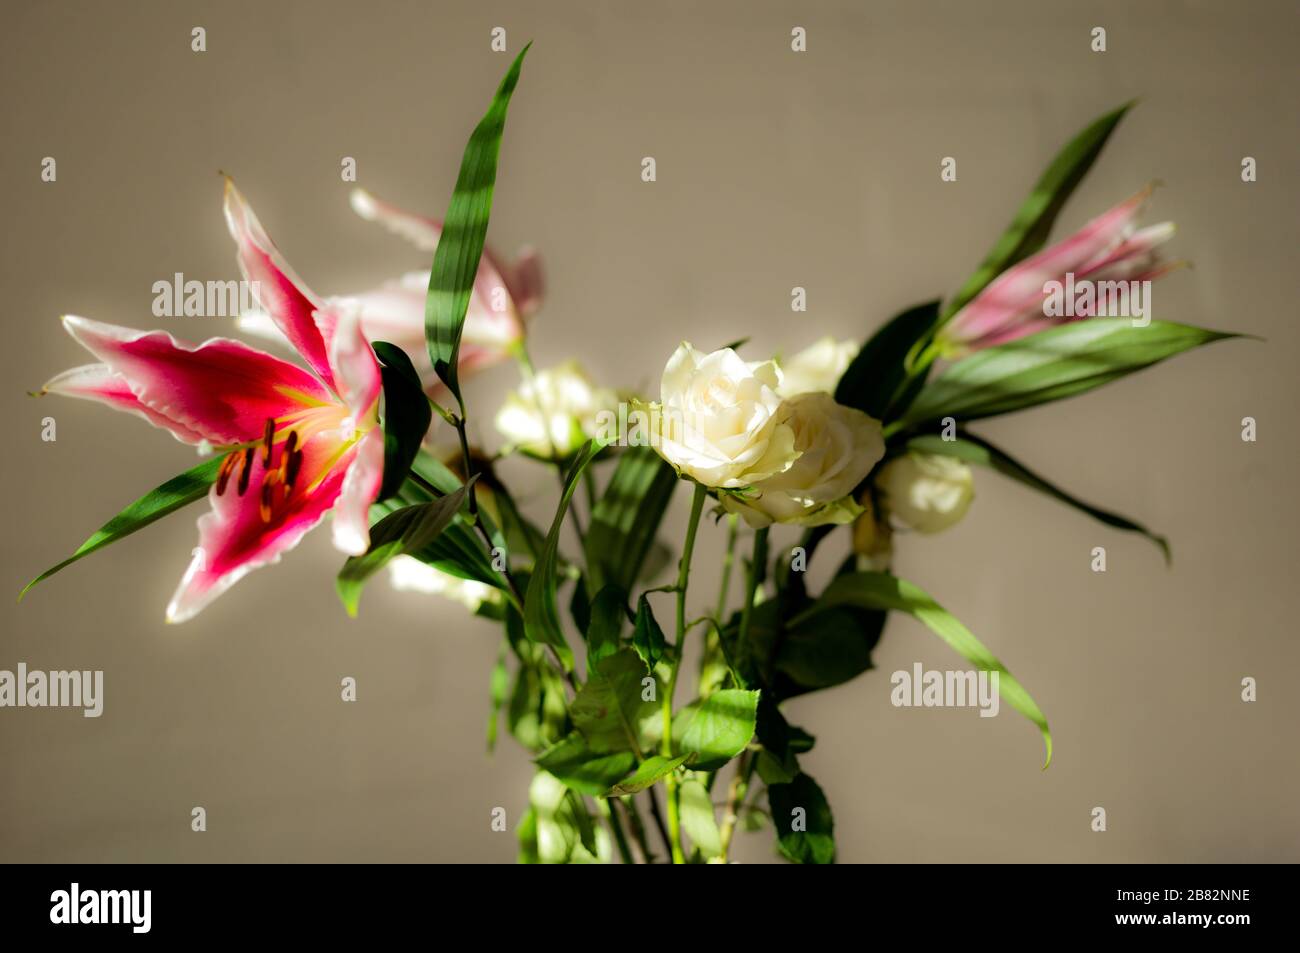 roses and lillies Stock Photo